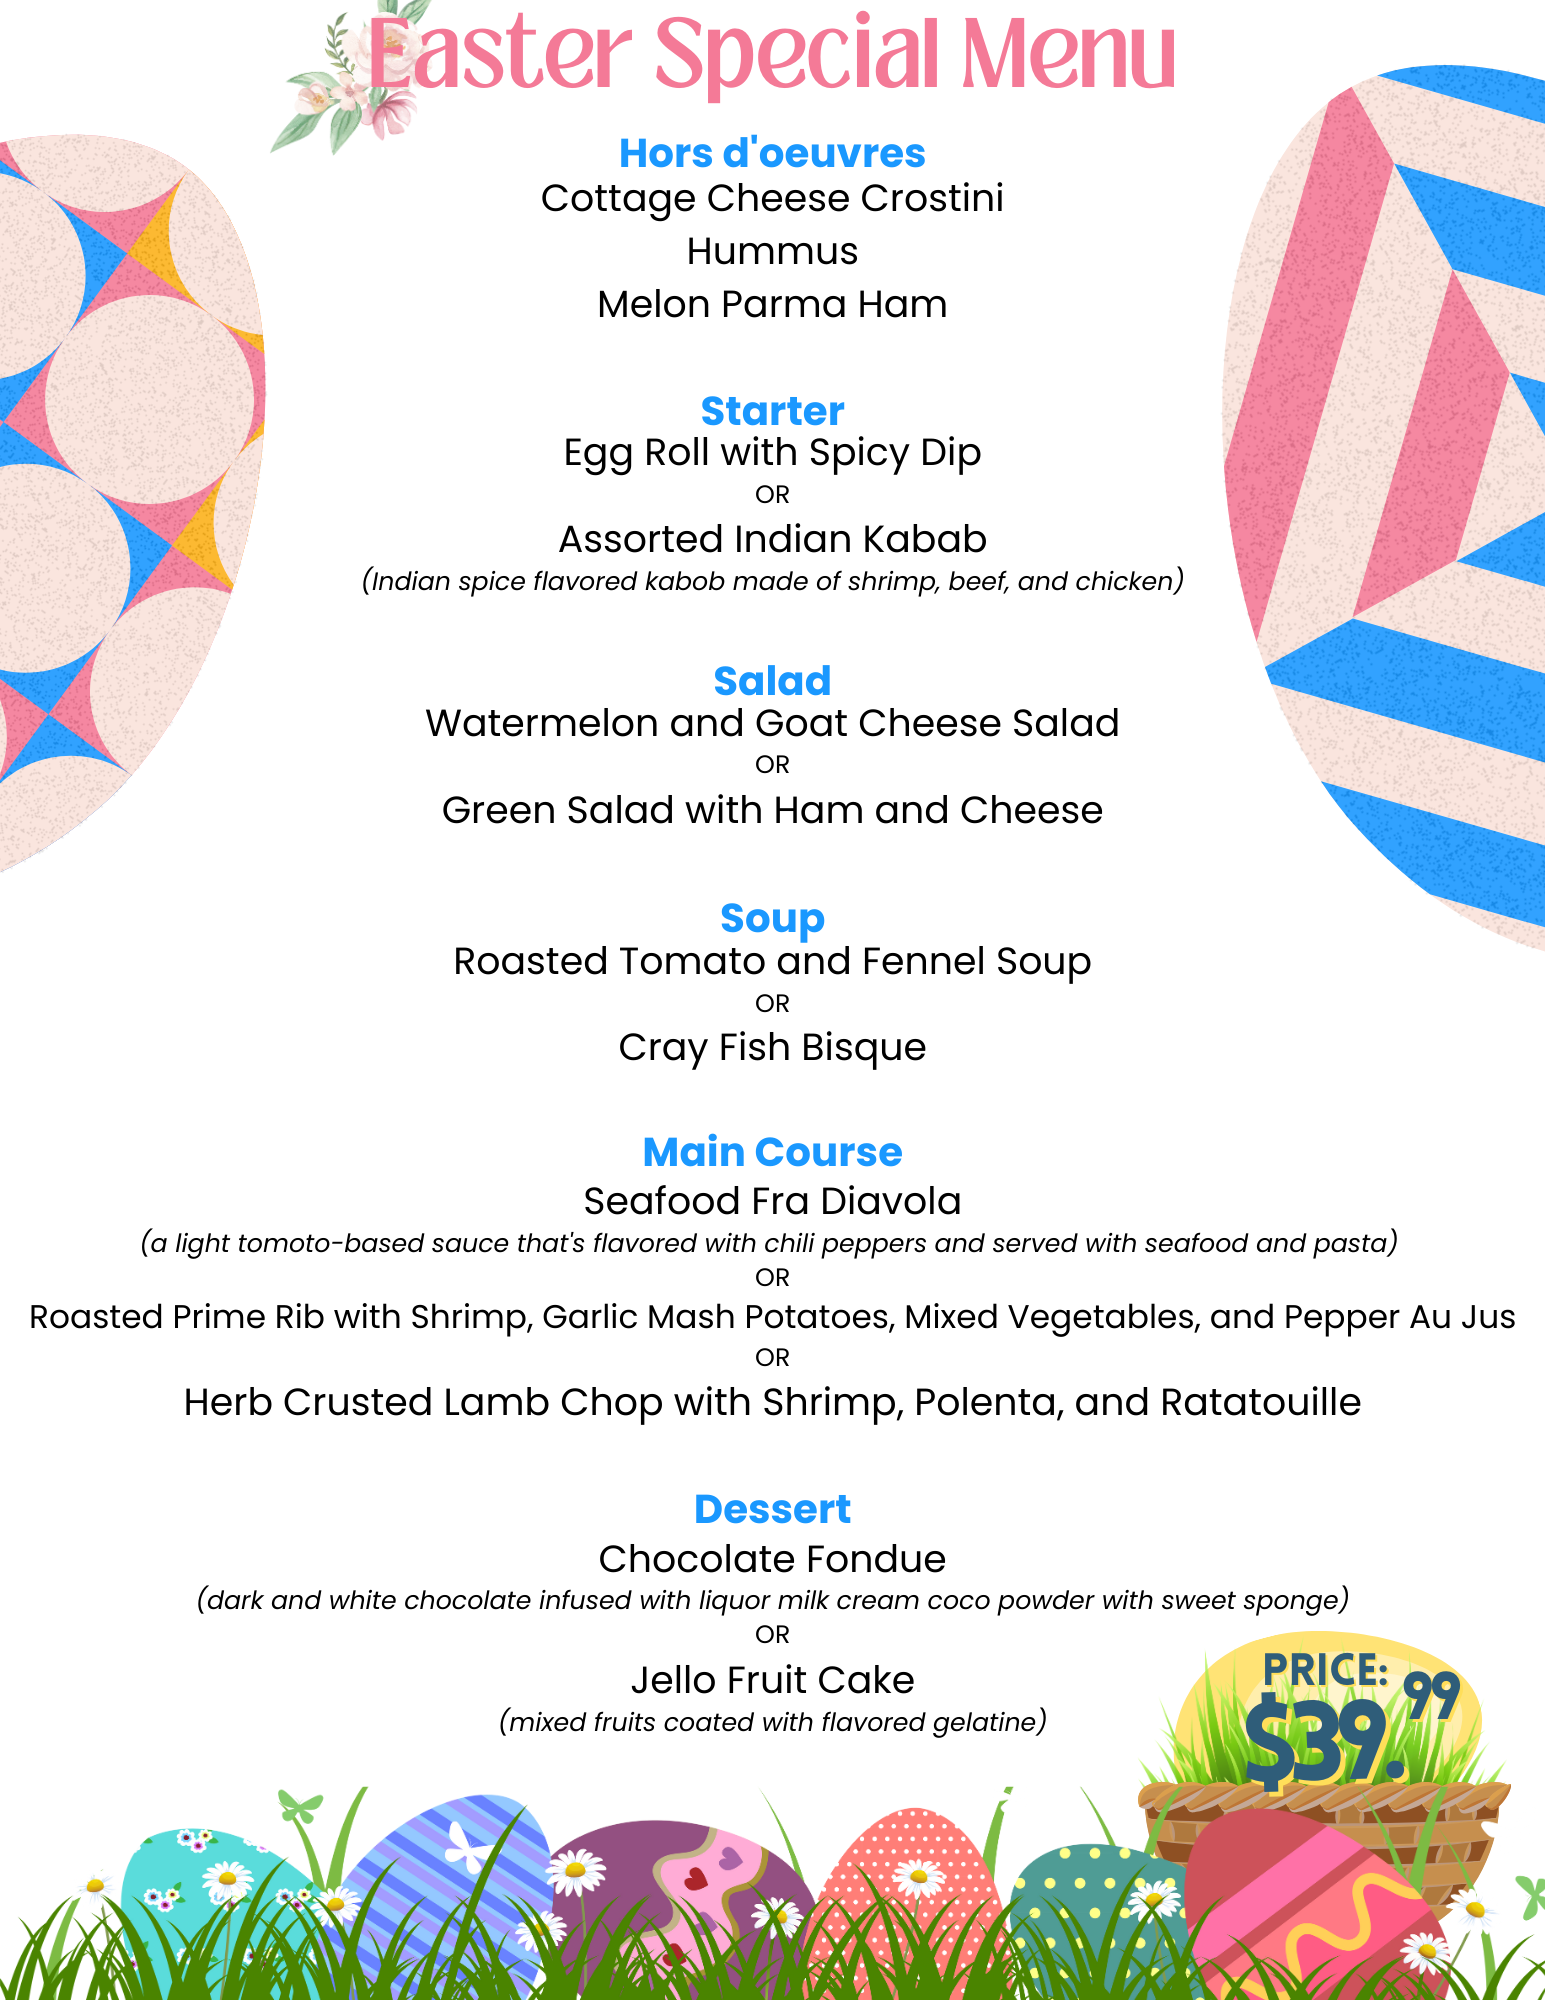 Easter Day Menu for Sunset Bar & Grille in Trinidad, Colorado